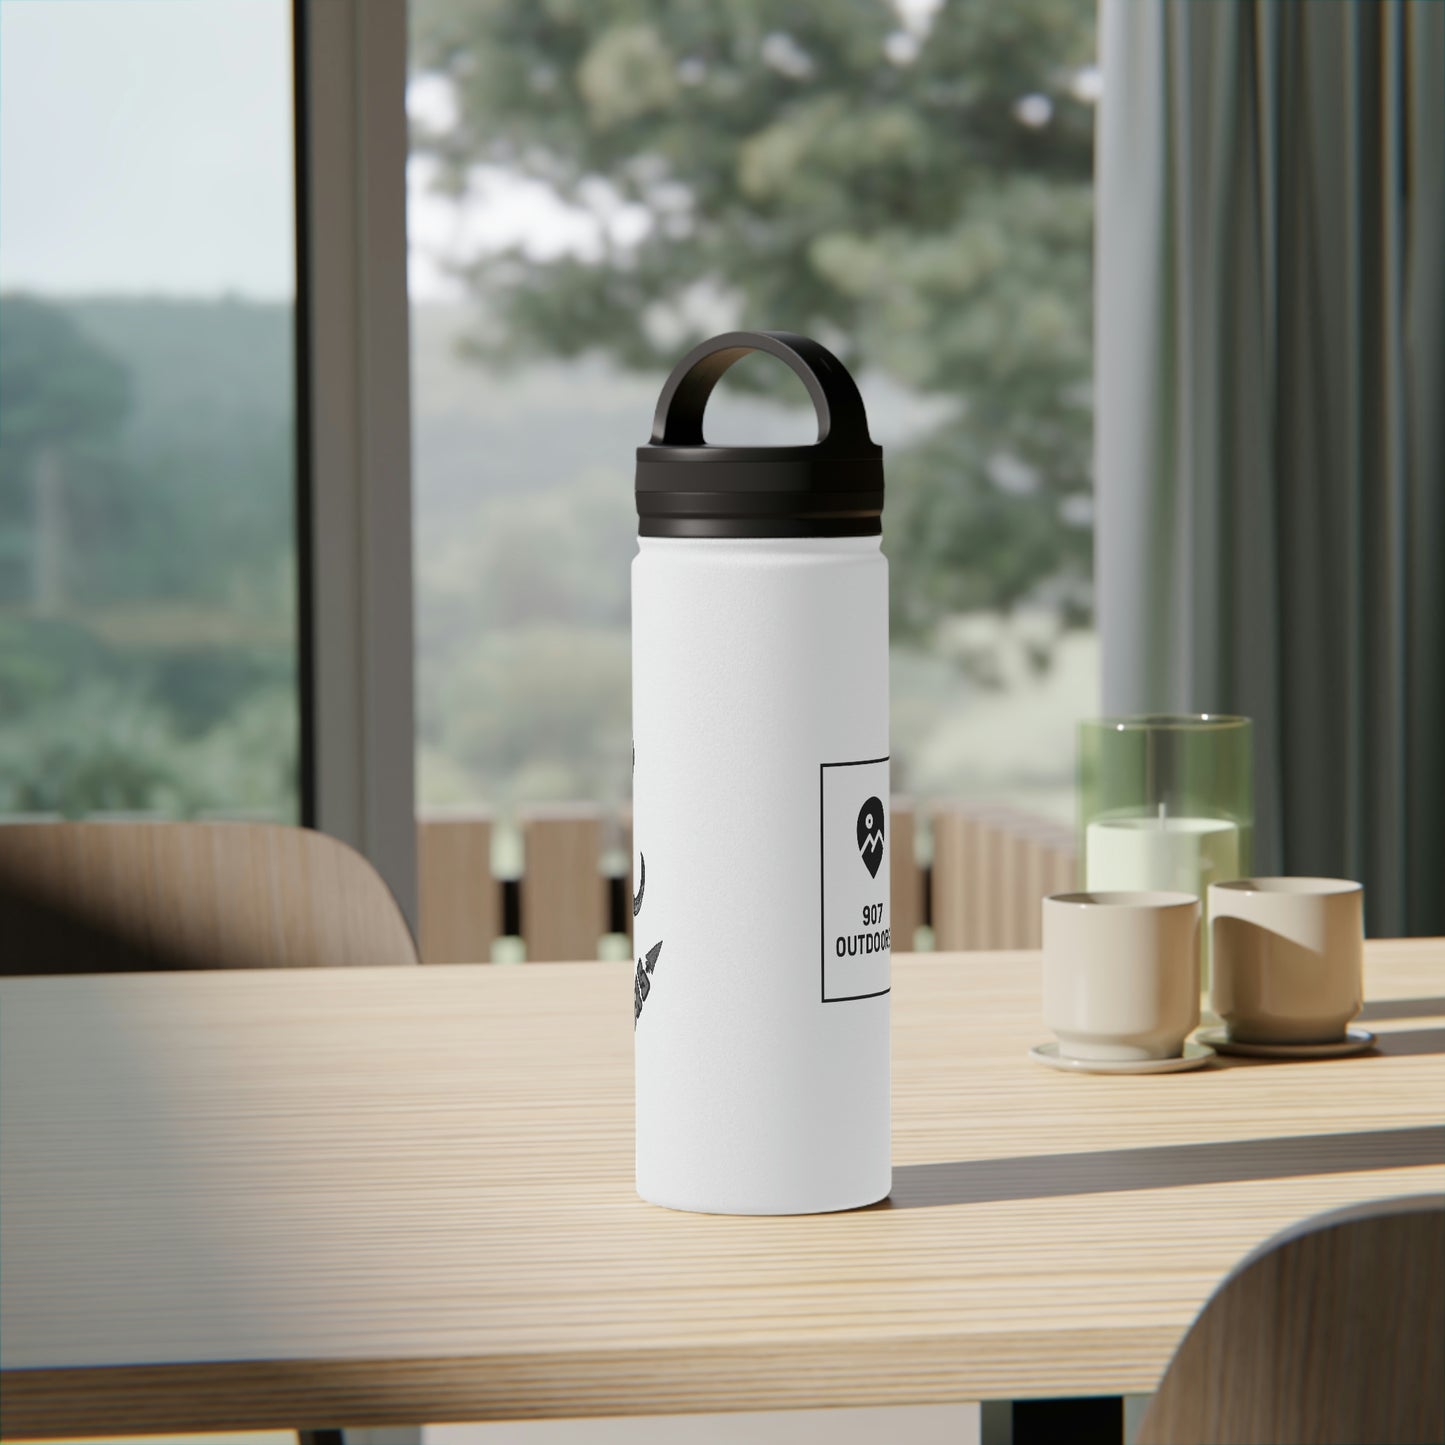 Musk ox Stainless Steel Water Bottle, Handle Lid - 907Outdoors